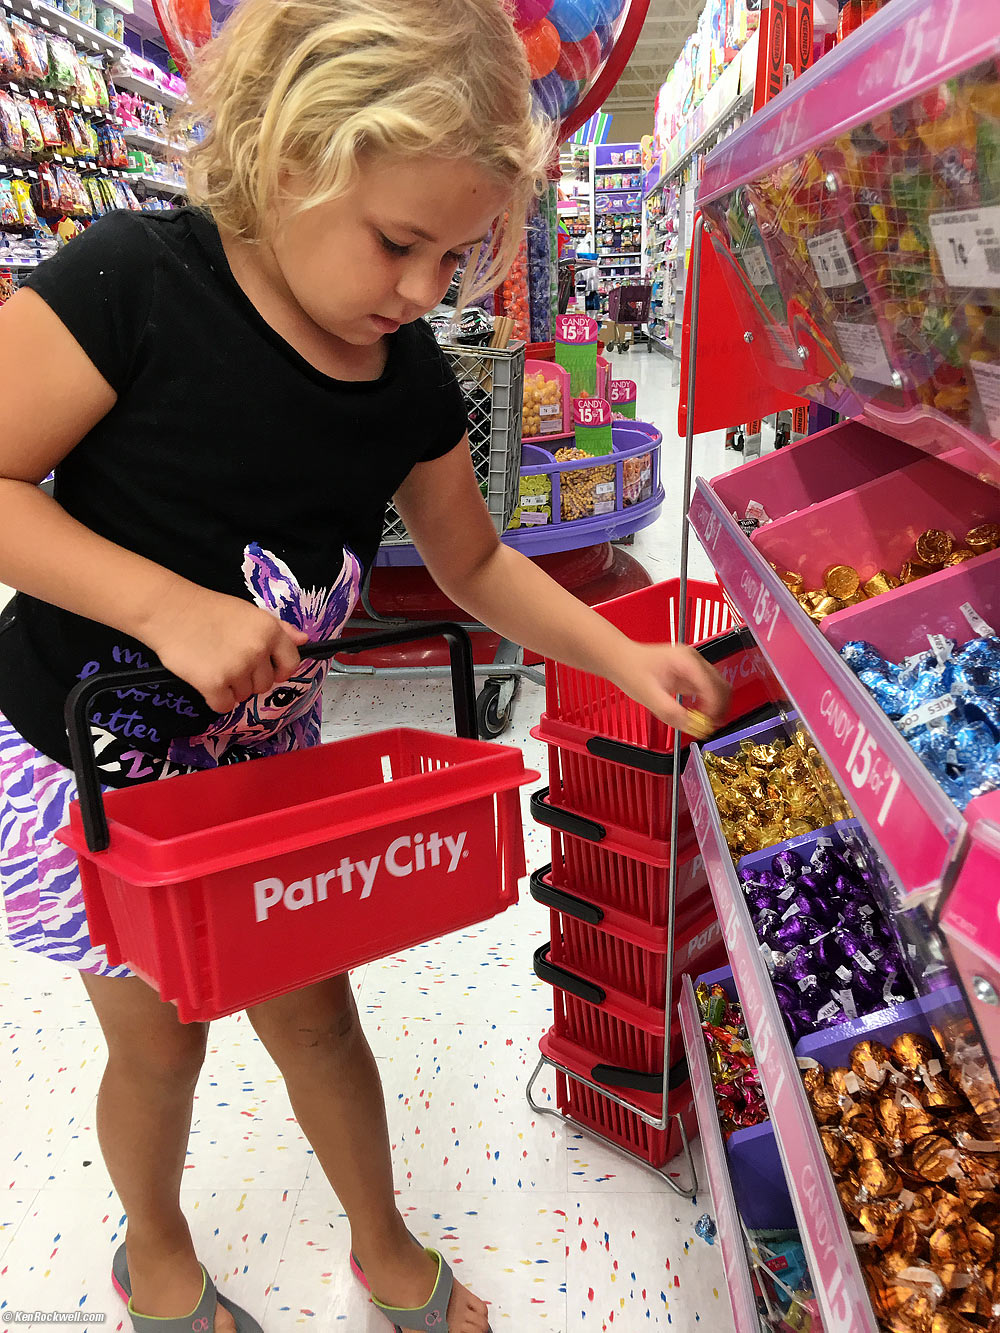 Katie candy shopping